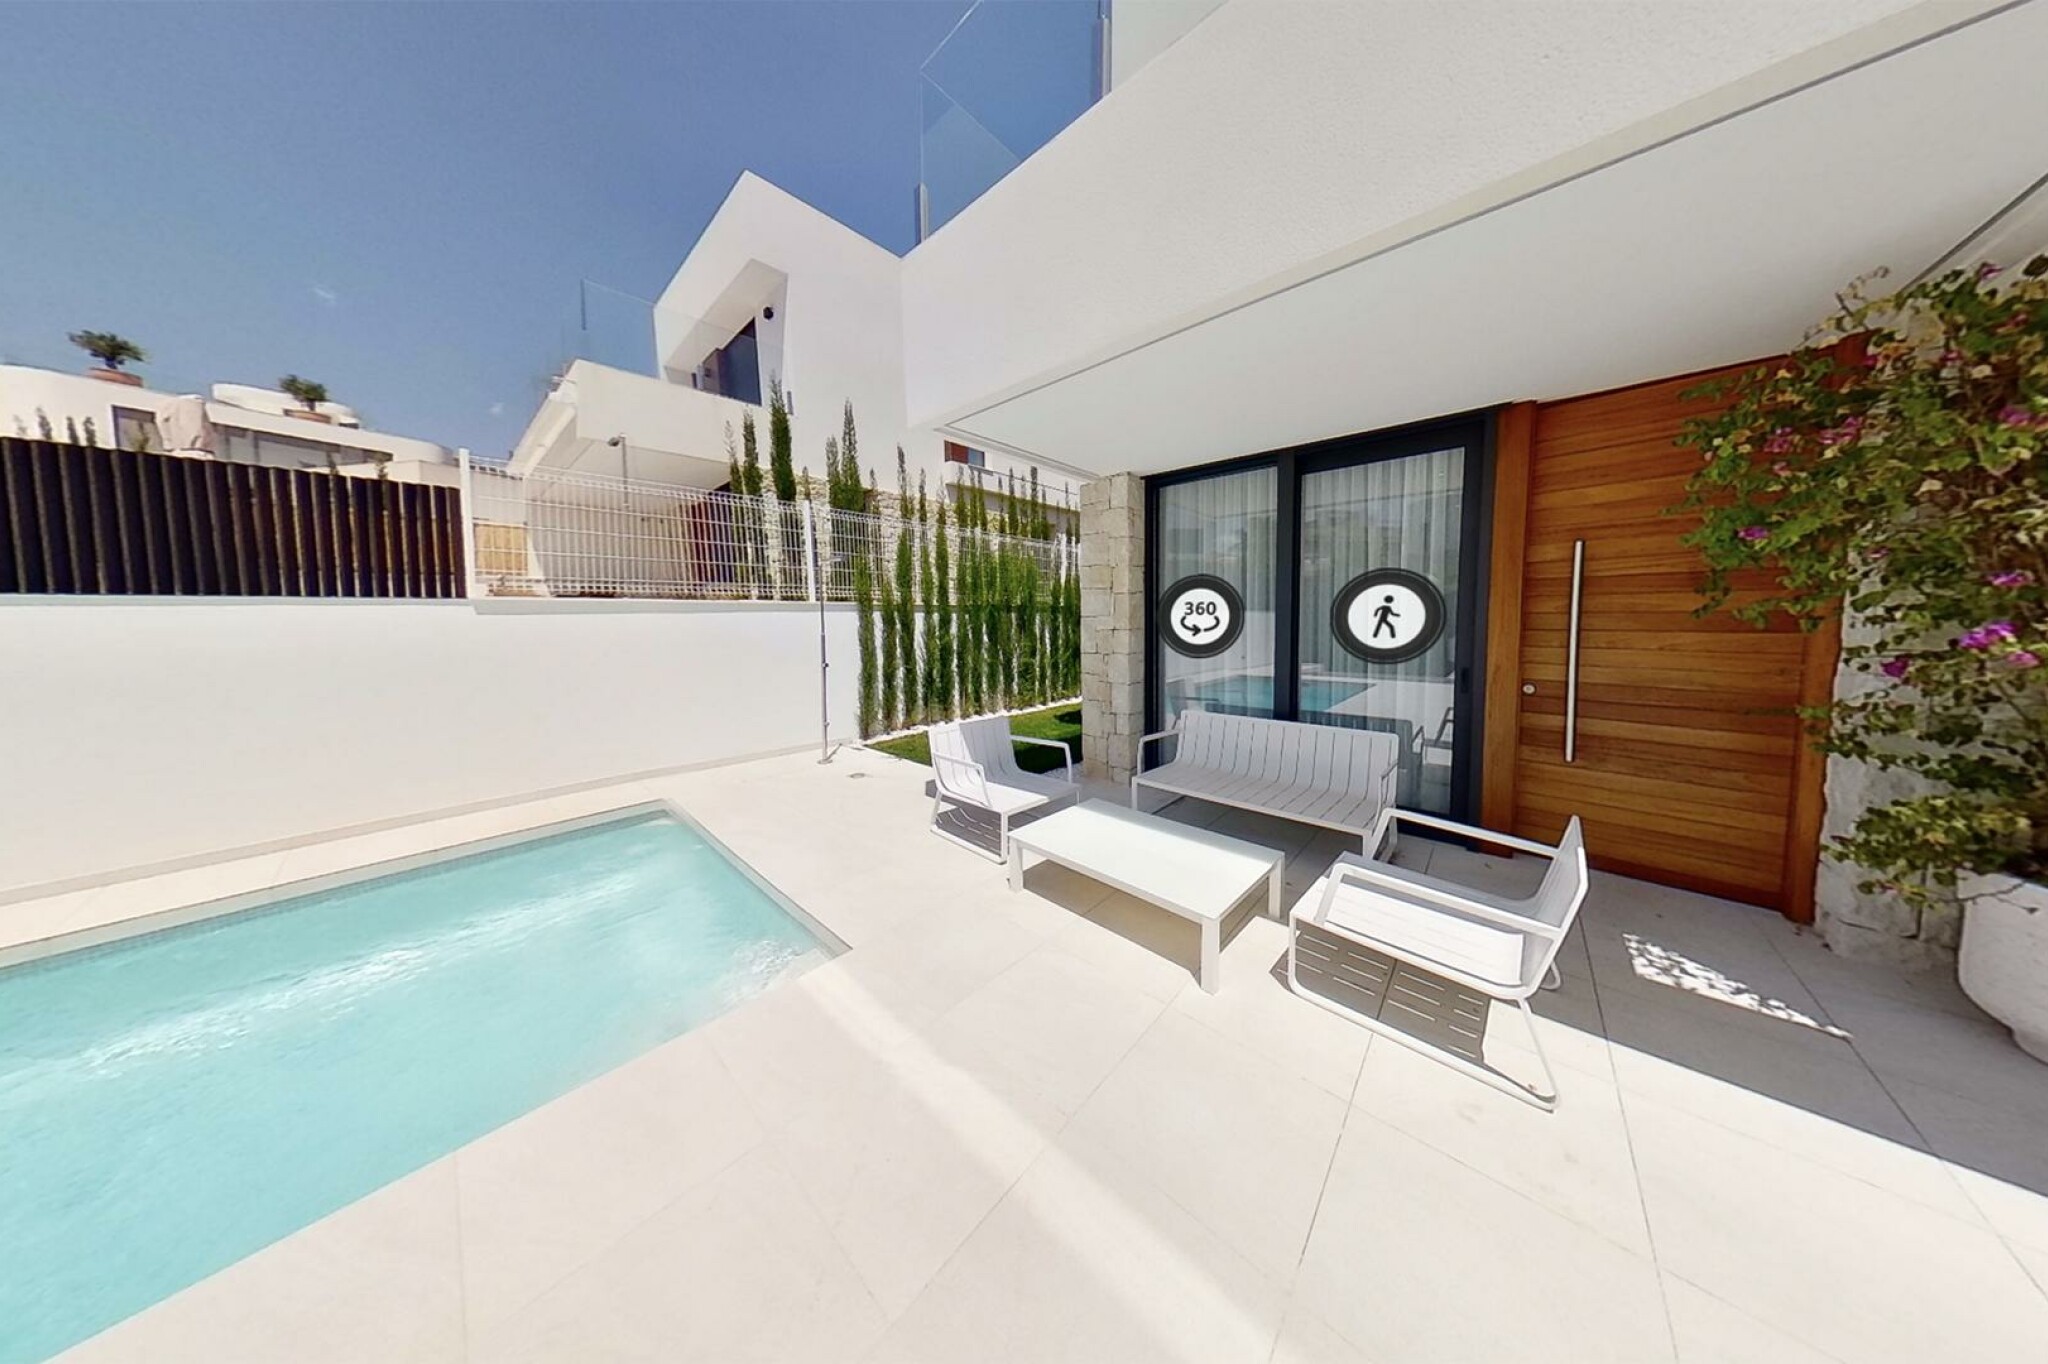 Virtual visit to one of our townhouses at Sierra Cortina